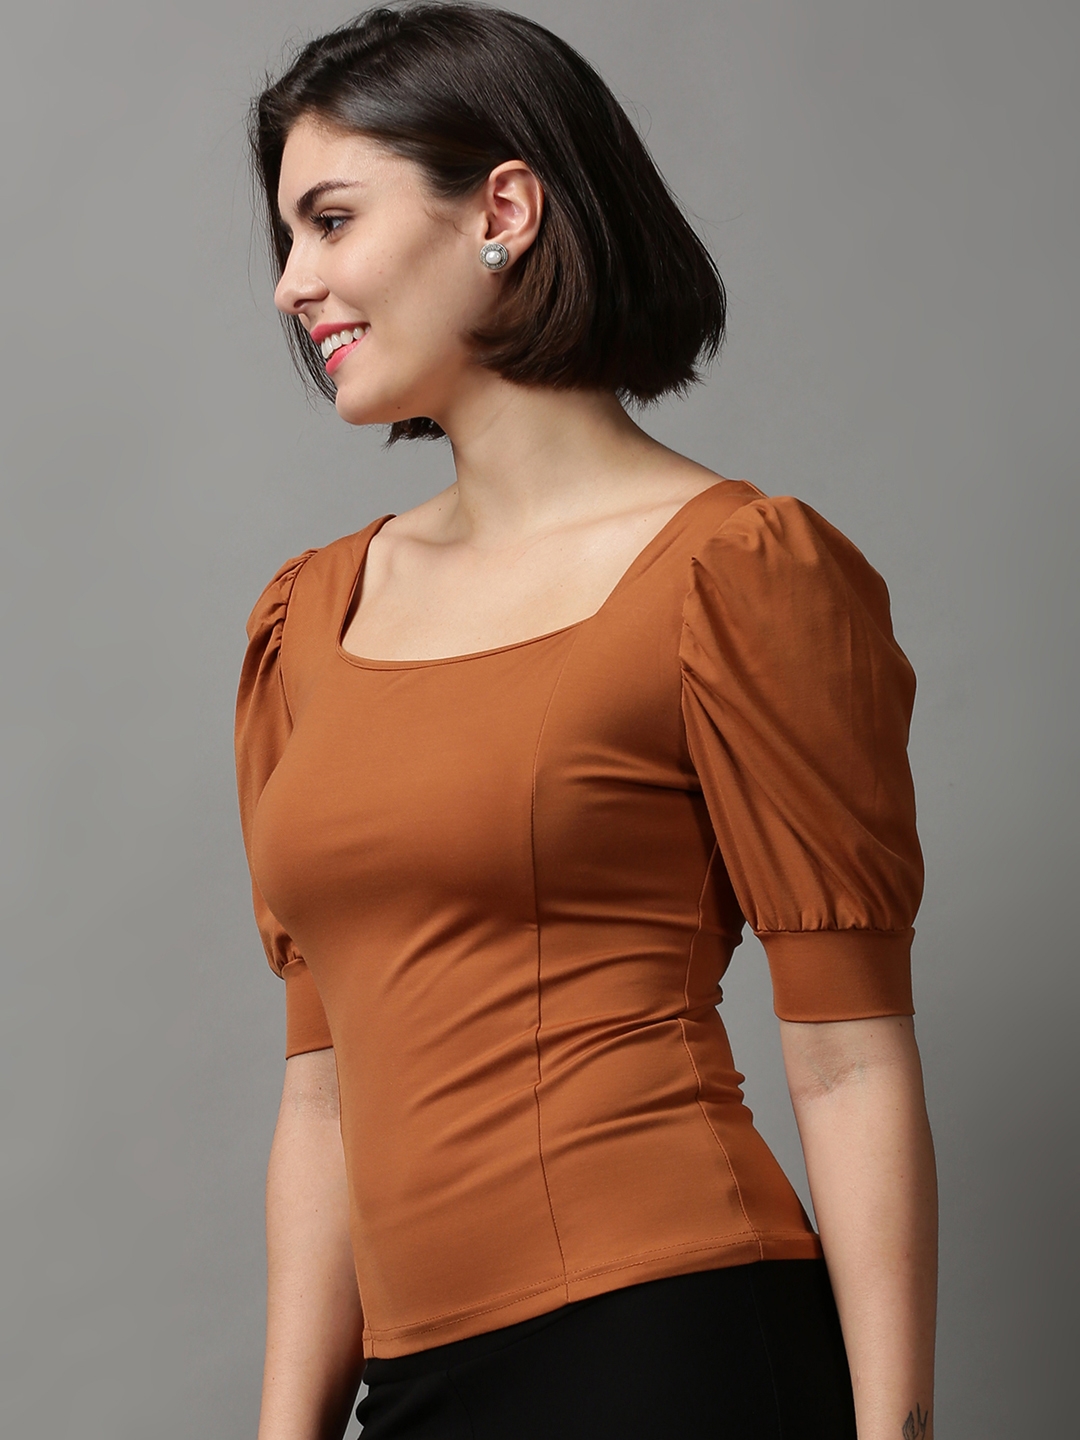 Women's Brown Polyester Solid Tops